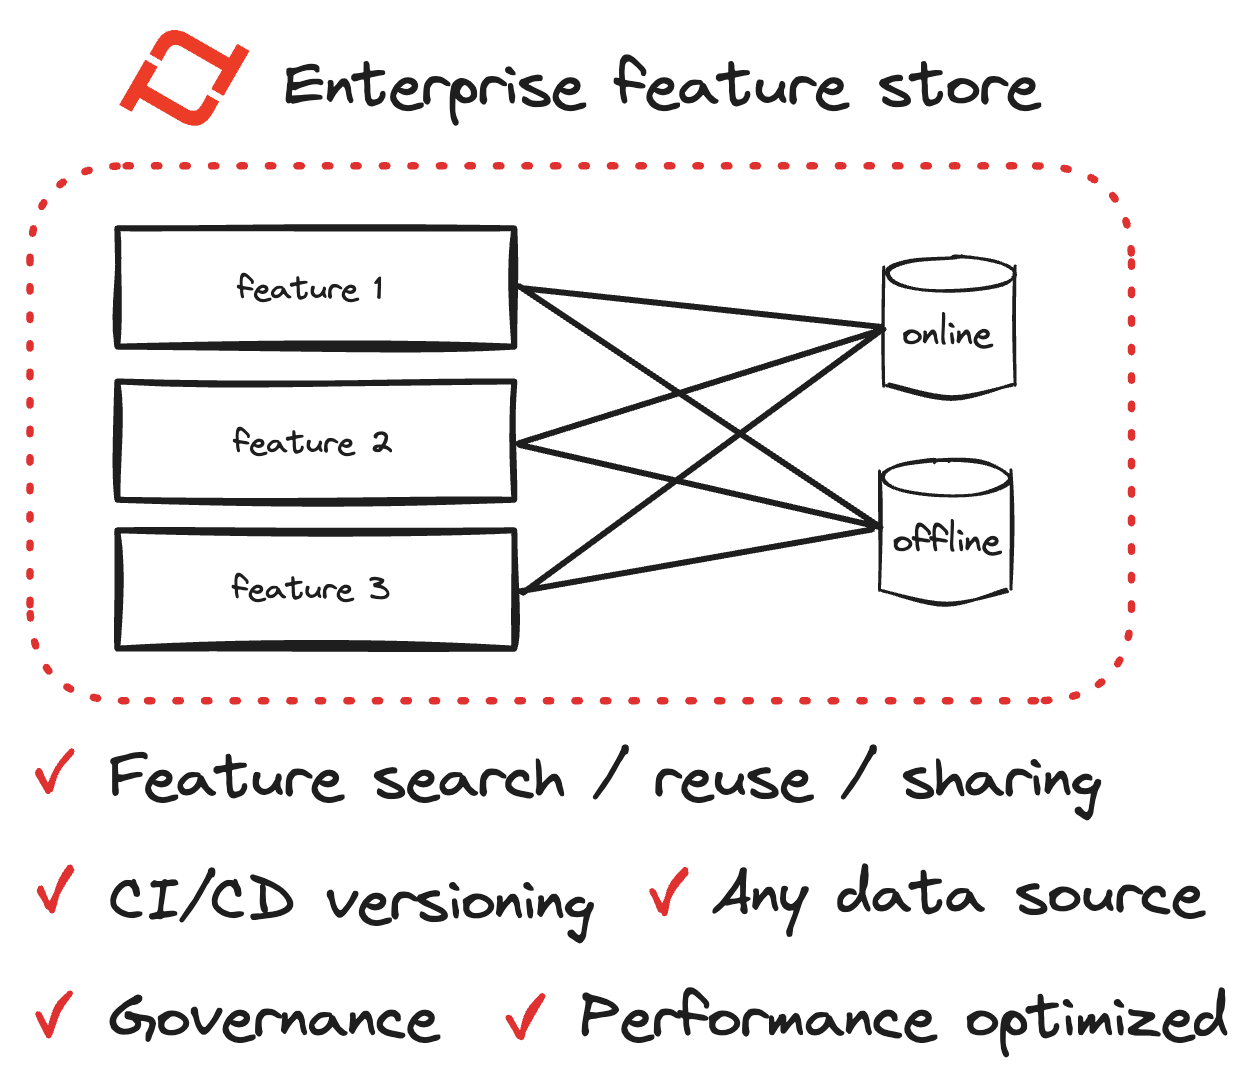 Illustration of an 'Enterprise Feature Store' with the Tecton logo. Three rectangles labeled 'Feature 1', 'Feature 2', and 'Feature 3' are connected to two data stores, one labeled 'online' and the other 'offline'. Below are checkmarks beside benefits: 'Feature search / reuse / sharing', 'CI/CD versioning', 'Governance', 'Any data source', and 'Performance optimized'.